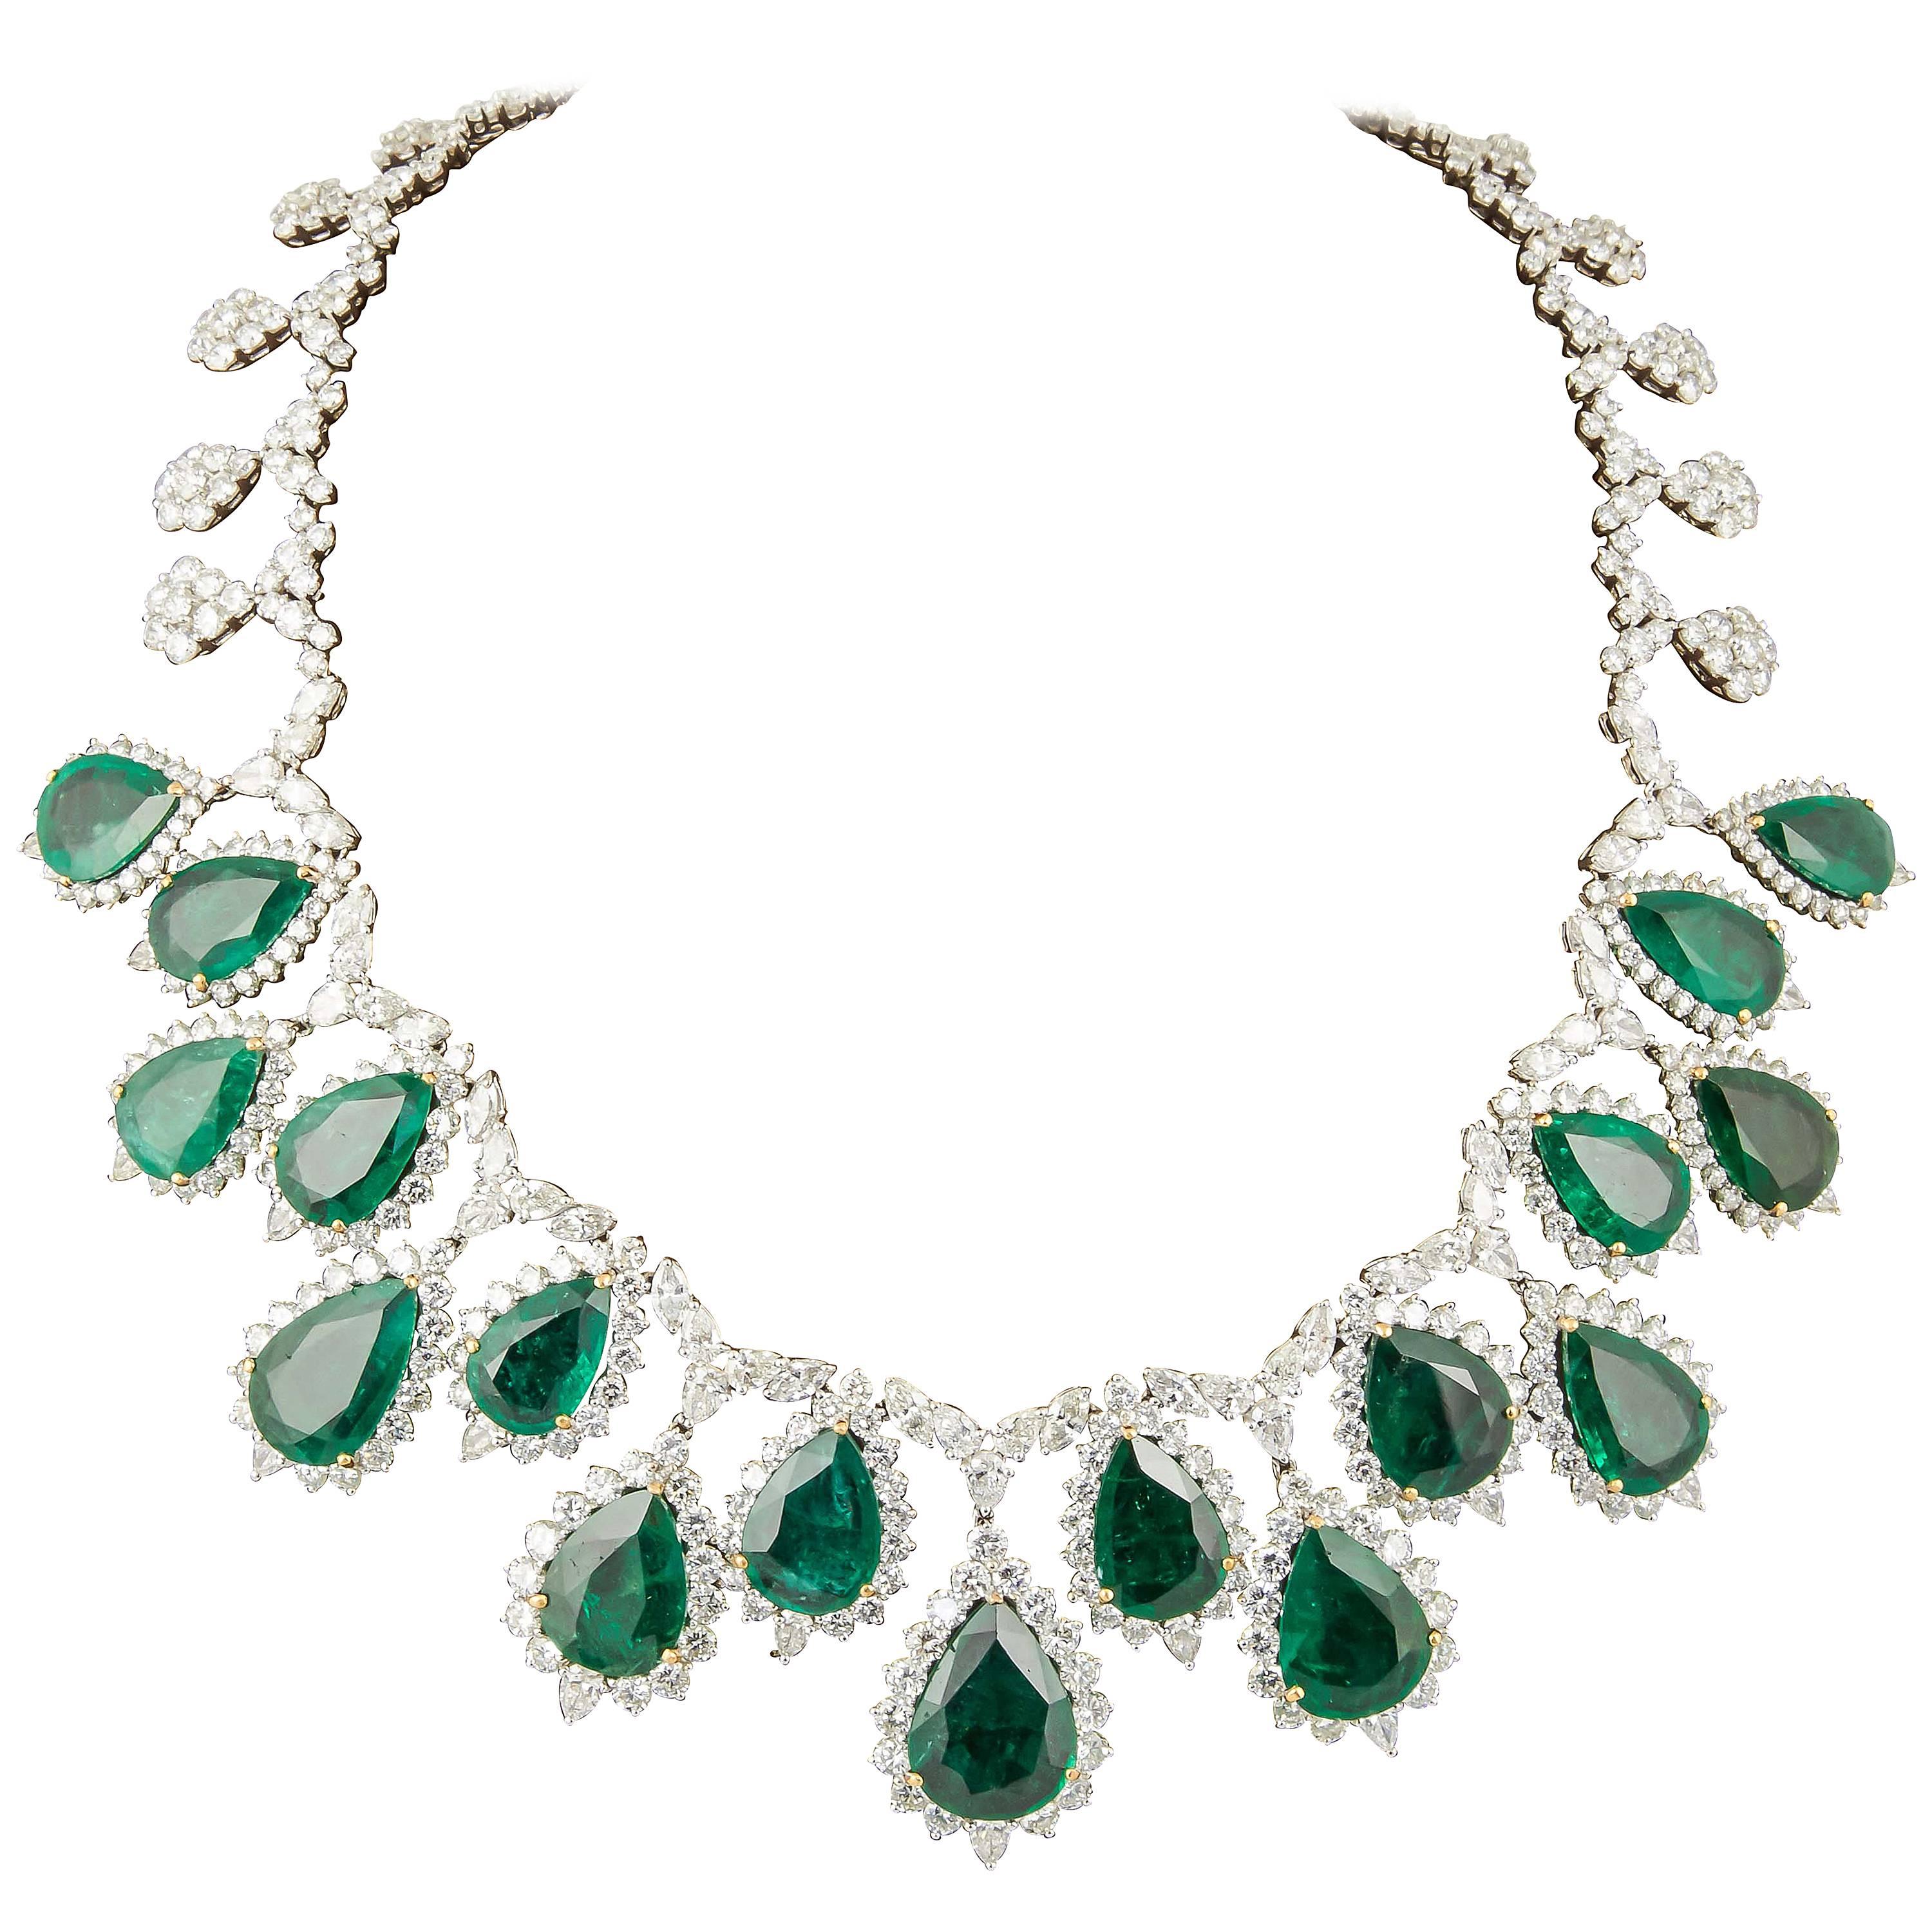 Incredible Emerald and Diamond Necklace